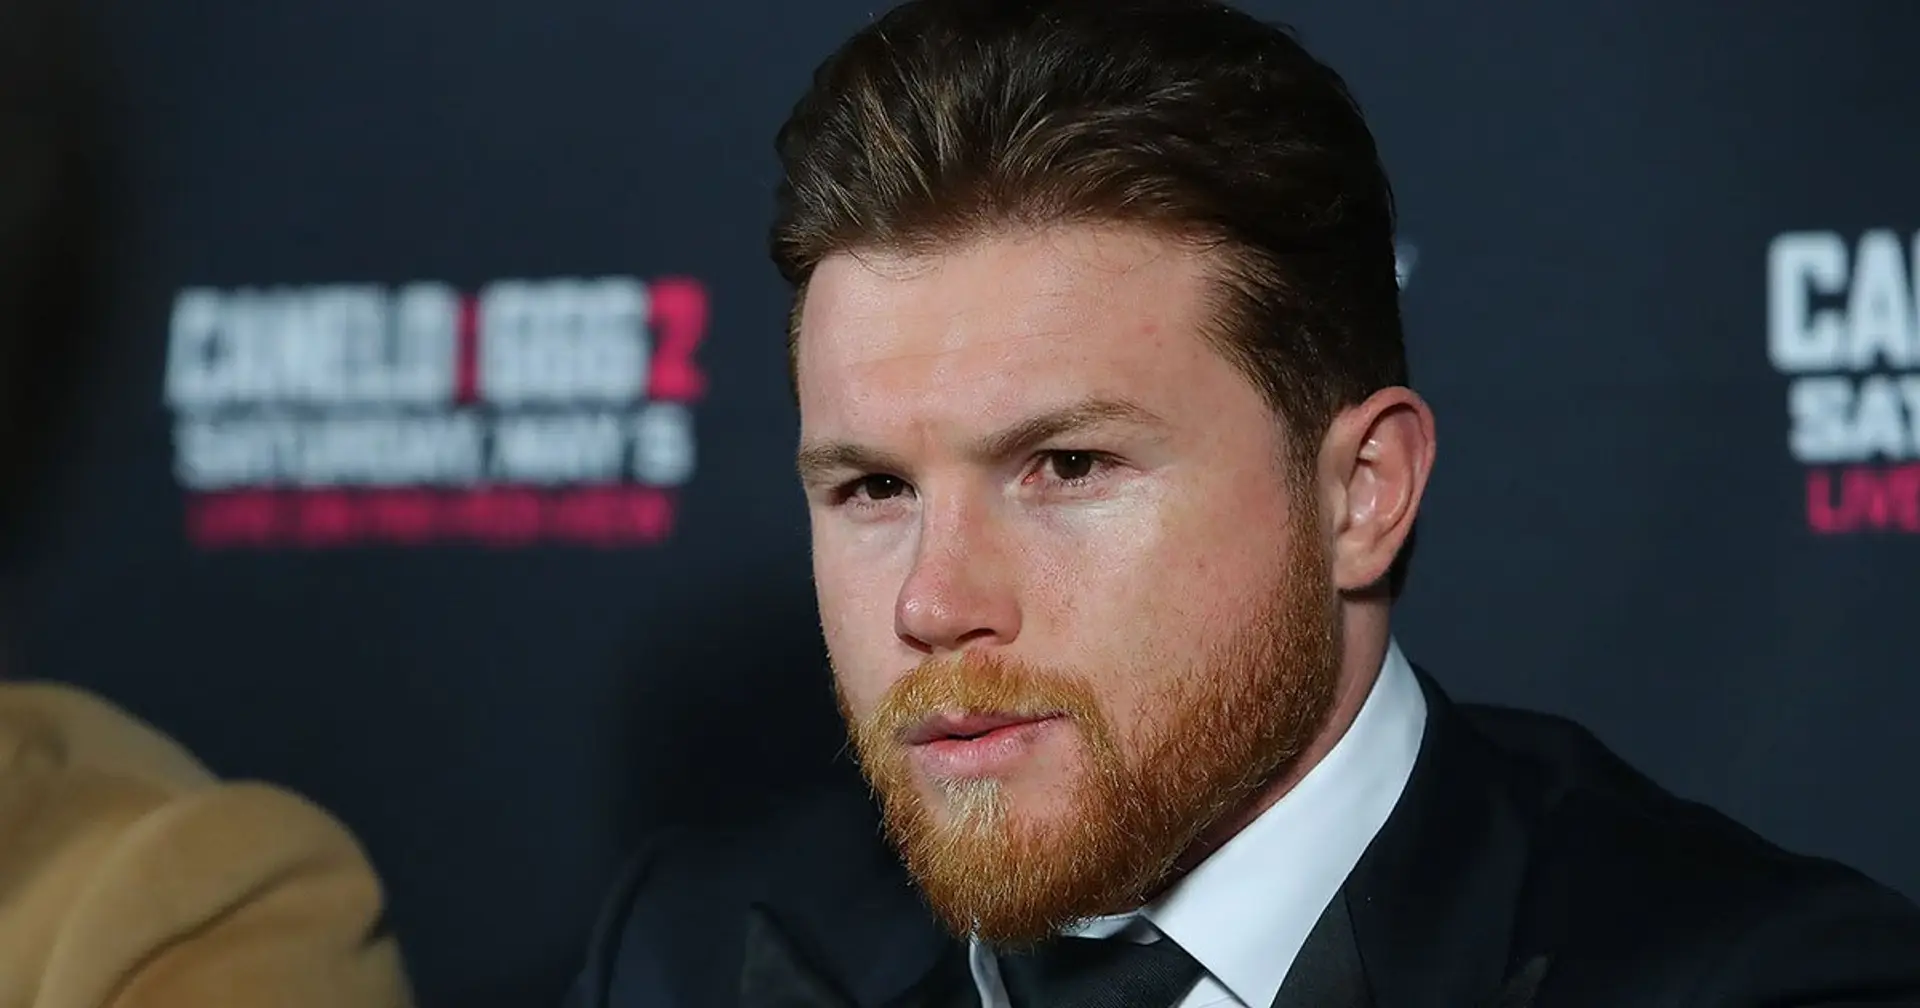 PBC Refuses To Pay Canelo $40M For Opponent Replacement On September 18 If Plant Fails To Fight